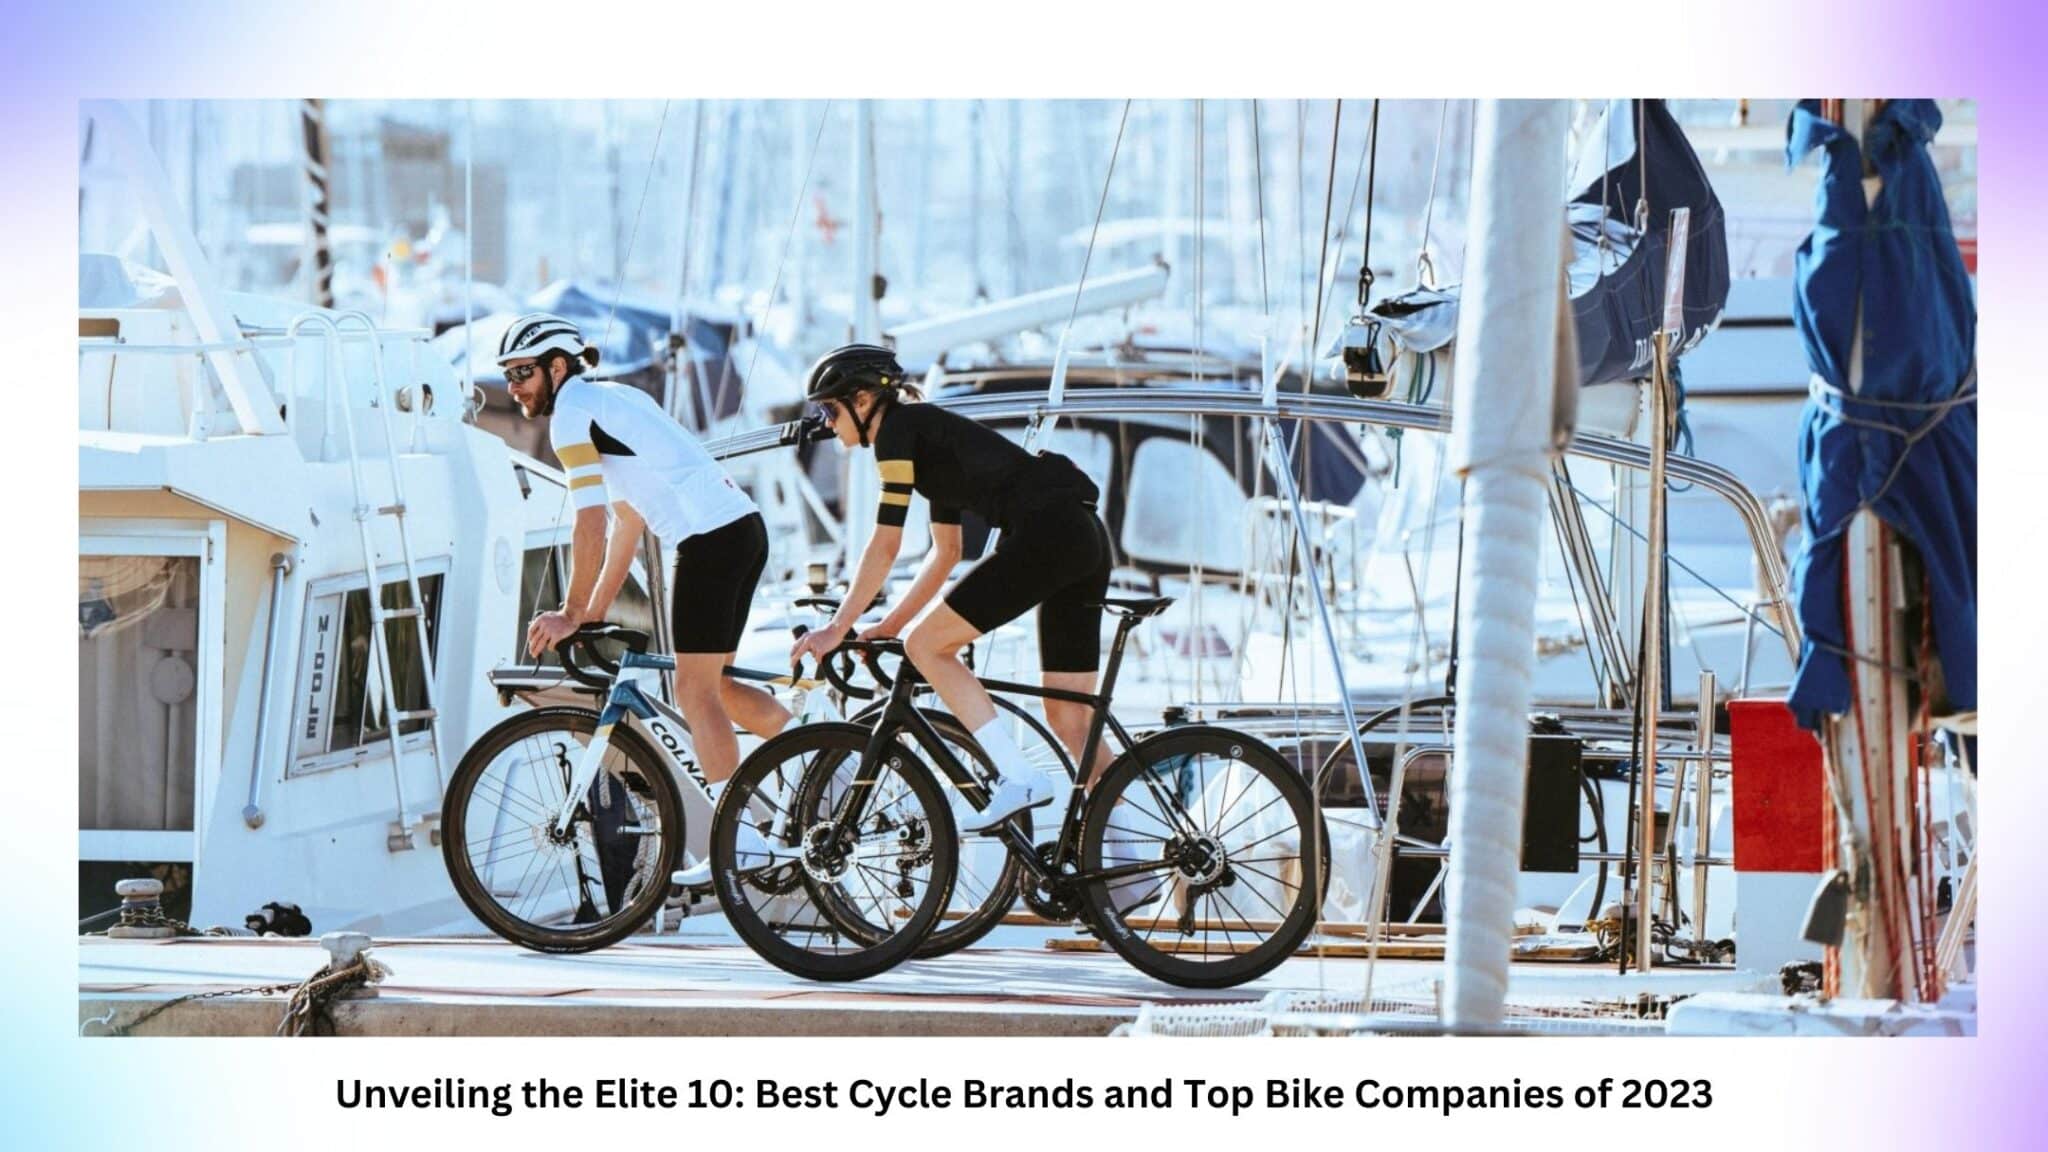 Revealing the Top 10 Bike Companies: Best Cycle Brands of 2023